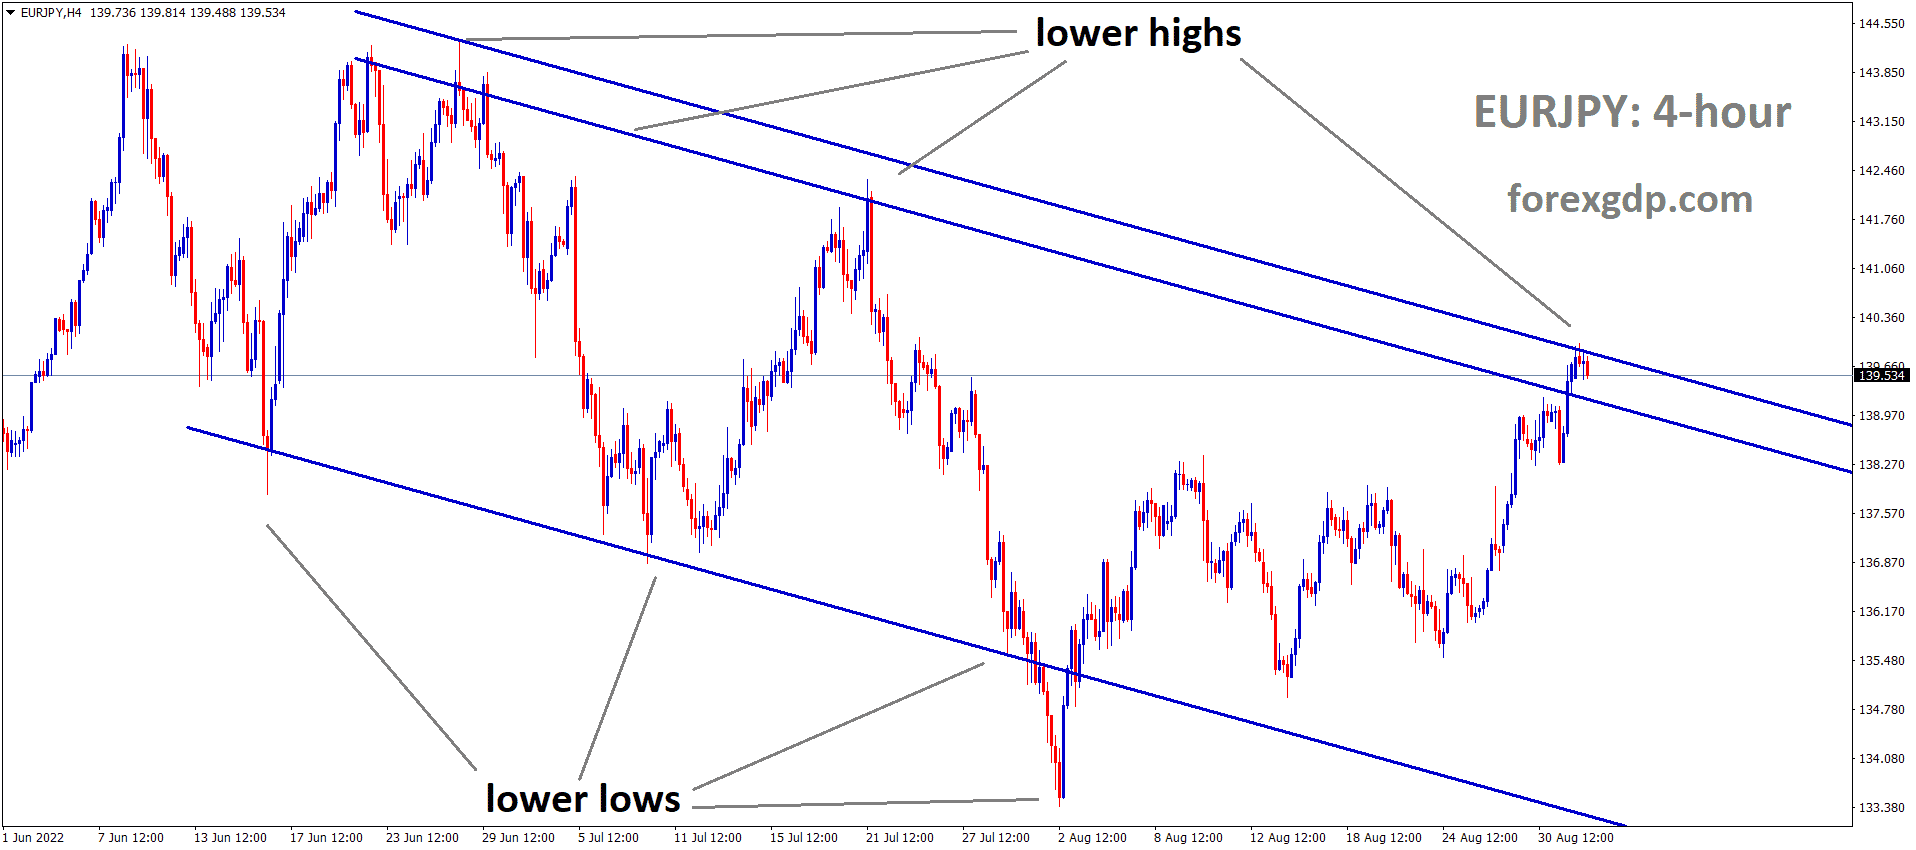 EURJPY is moving in the Descending channel and the market has reached the Lower high area of the channel